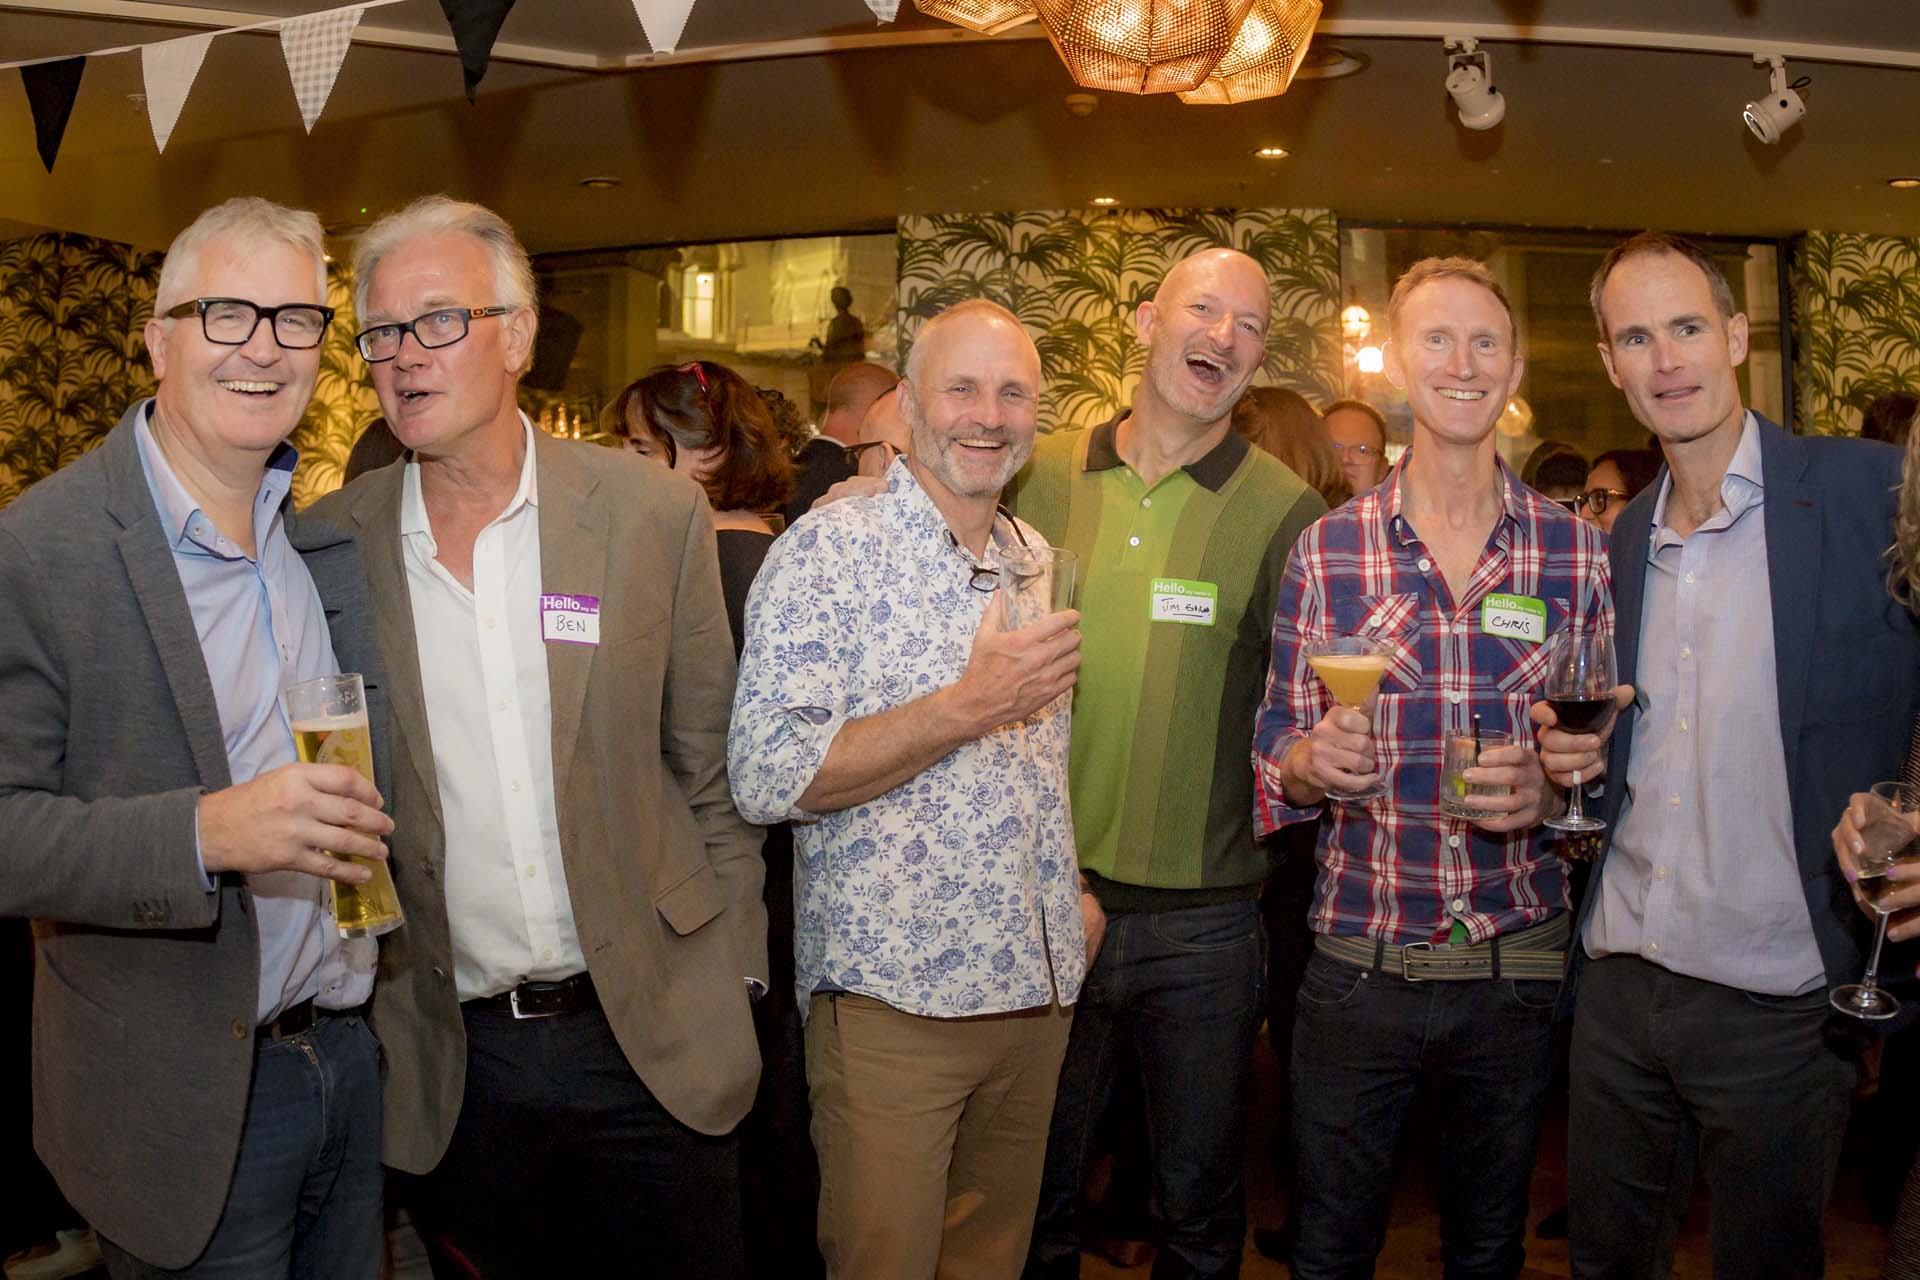 Barts doctors reunion The Fable Holborn Viaduct Bromley events photographer 213237